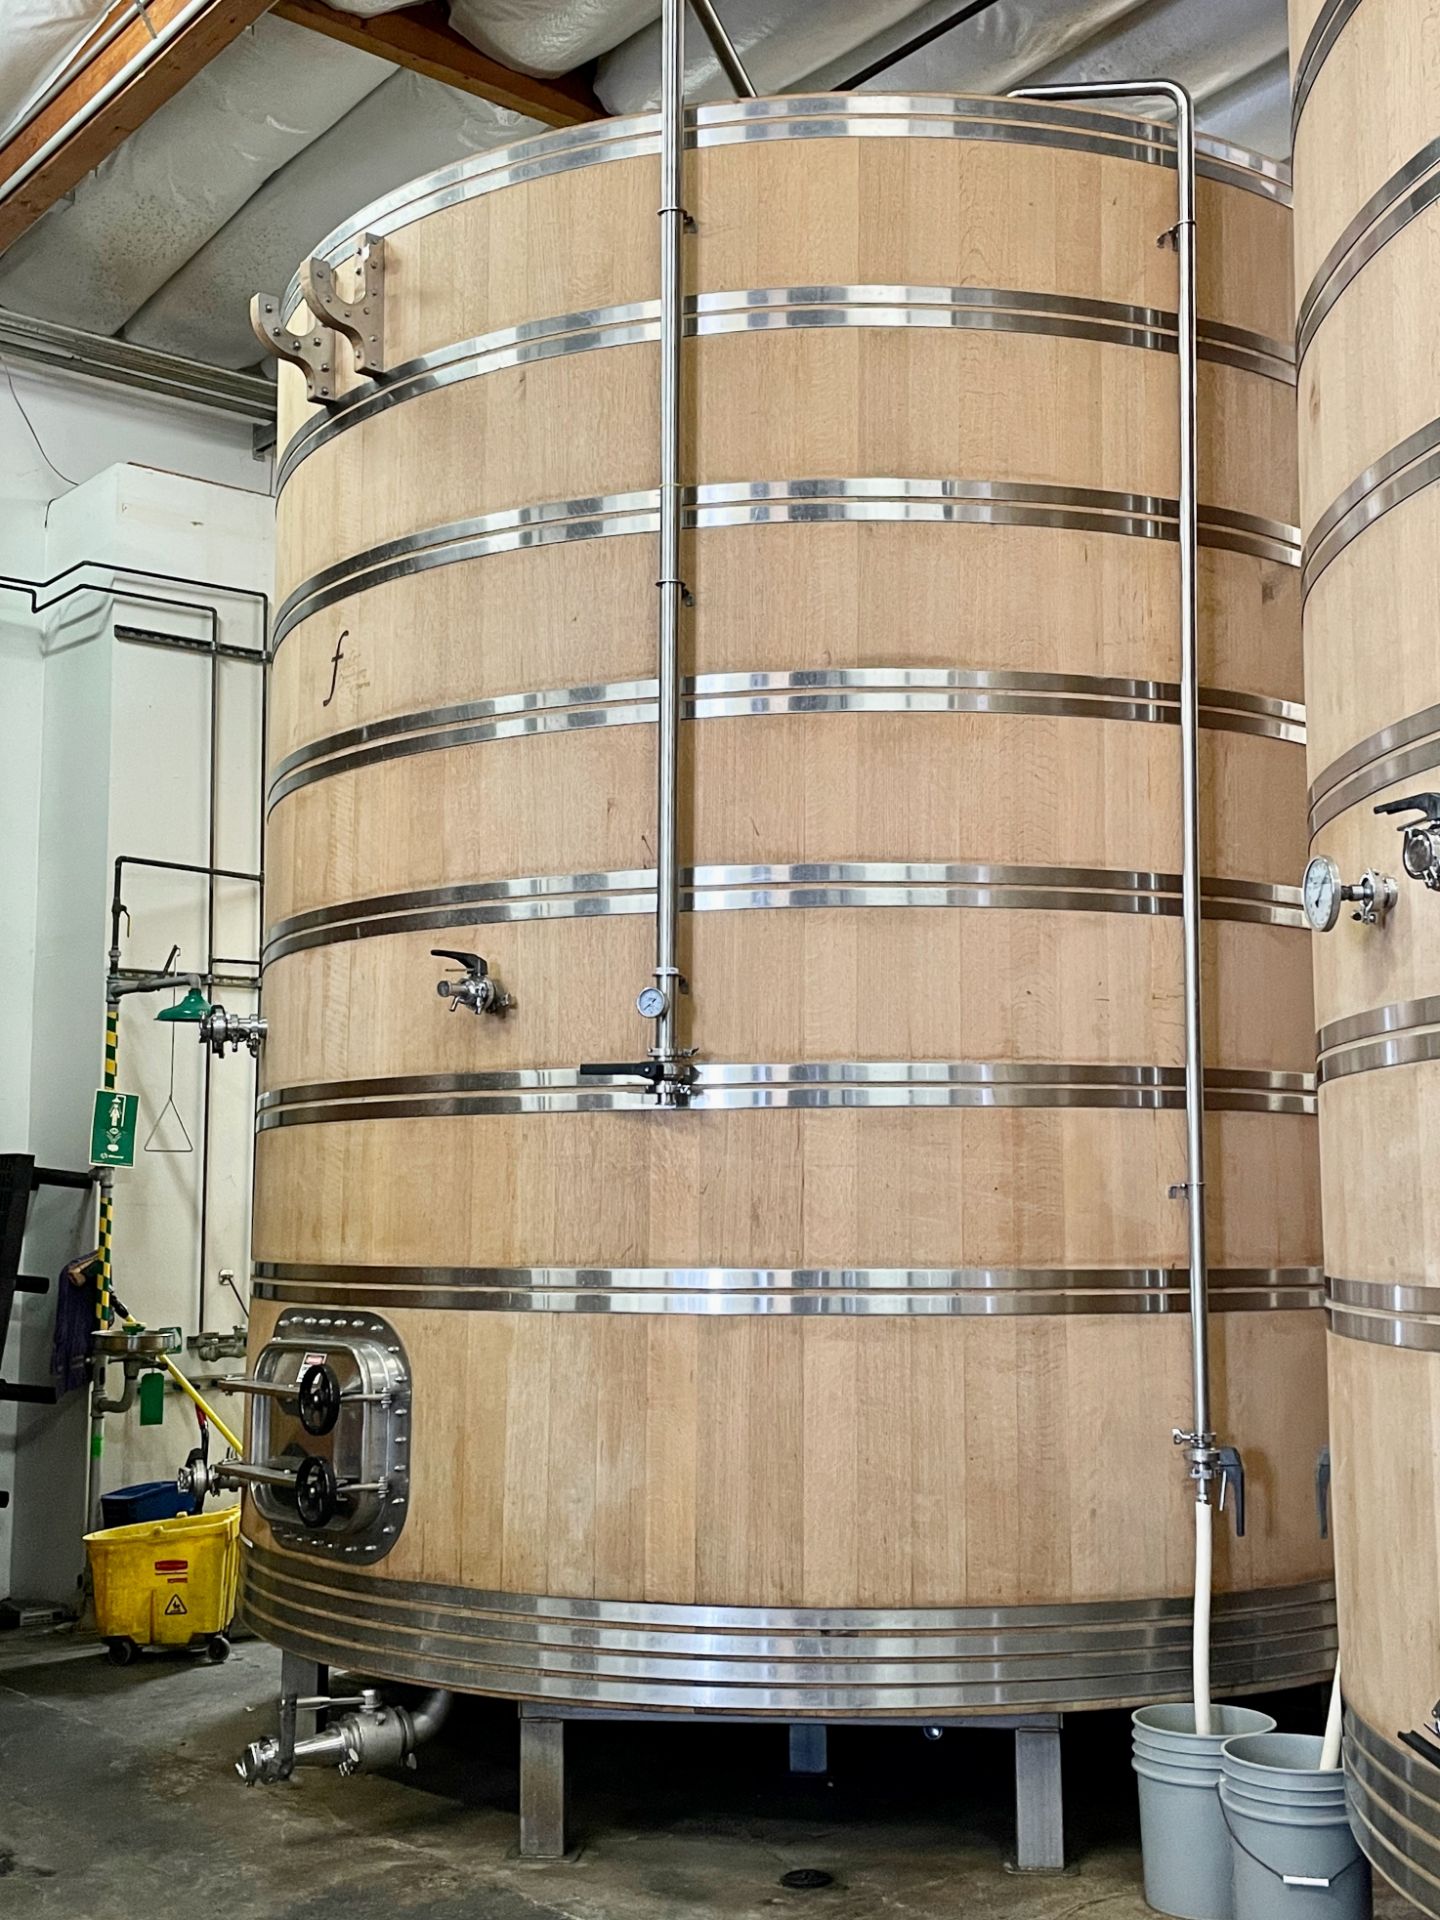 2015 Foeder Crafters of America (FCA) 250 BBL Foeder, American White Oak | Rig Fee: $5700 w/ Saddles - Image 2 of 5